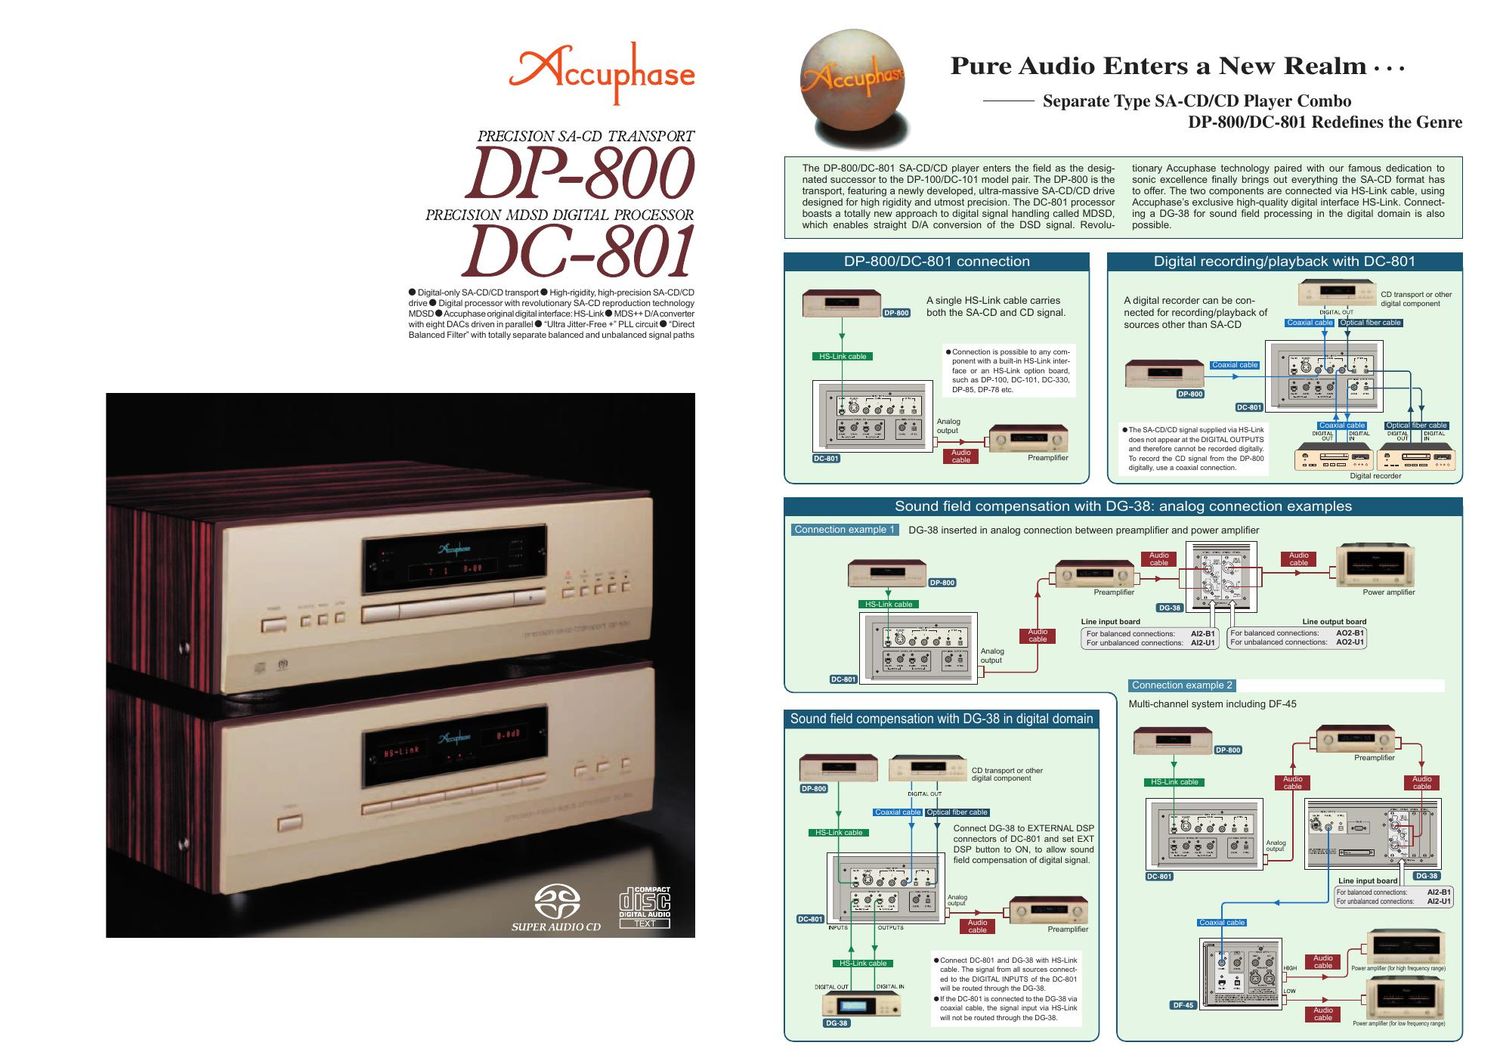 accuphase dc 801 brochure